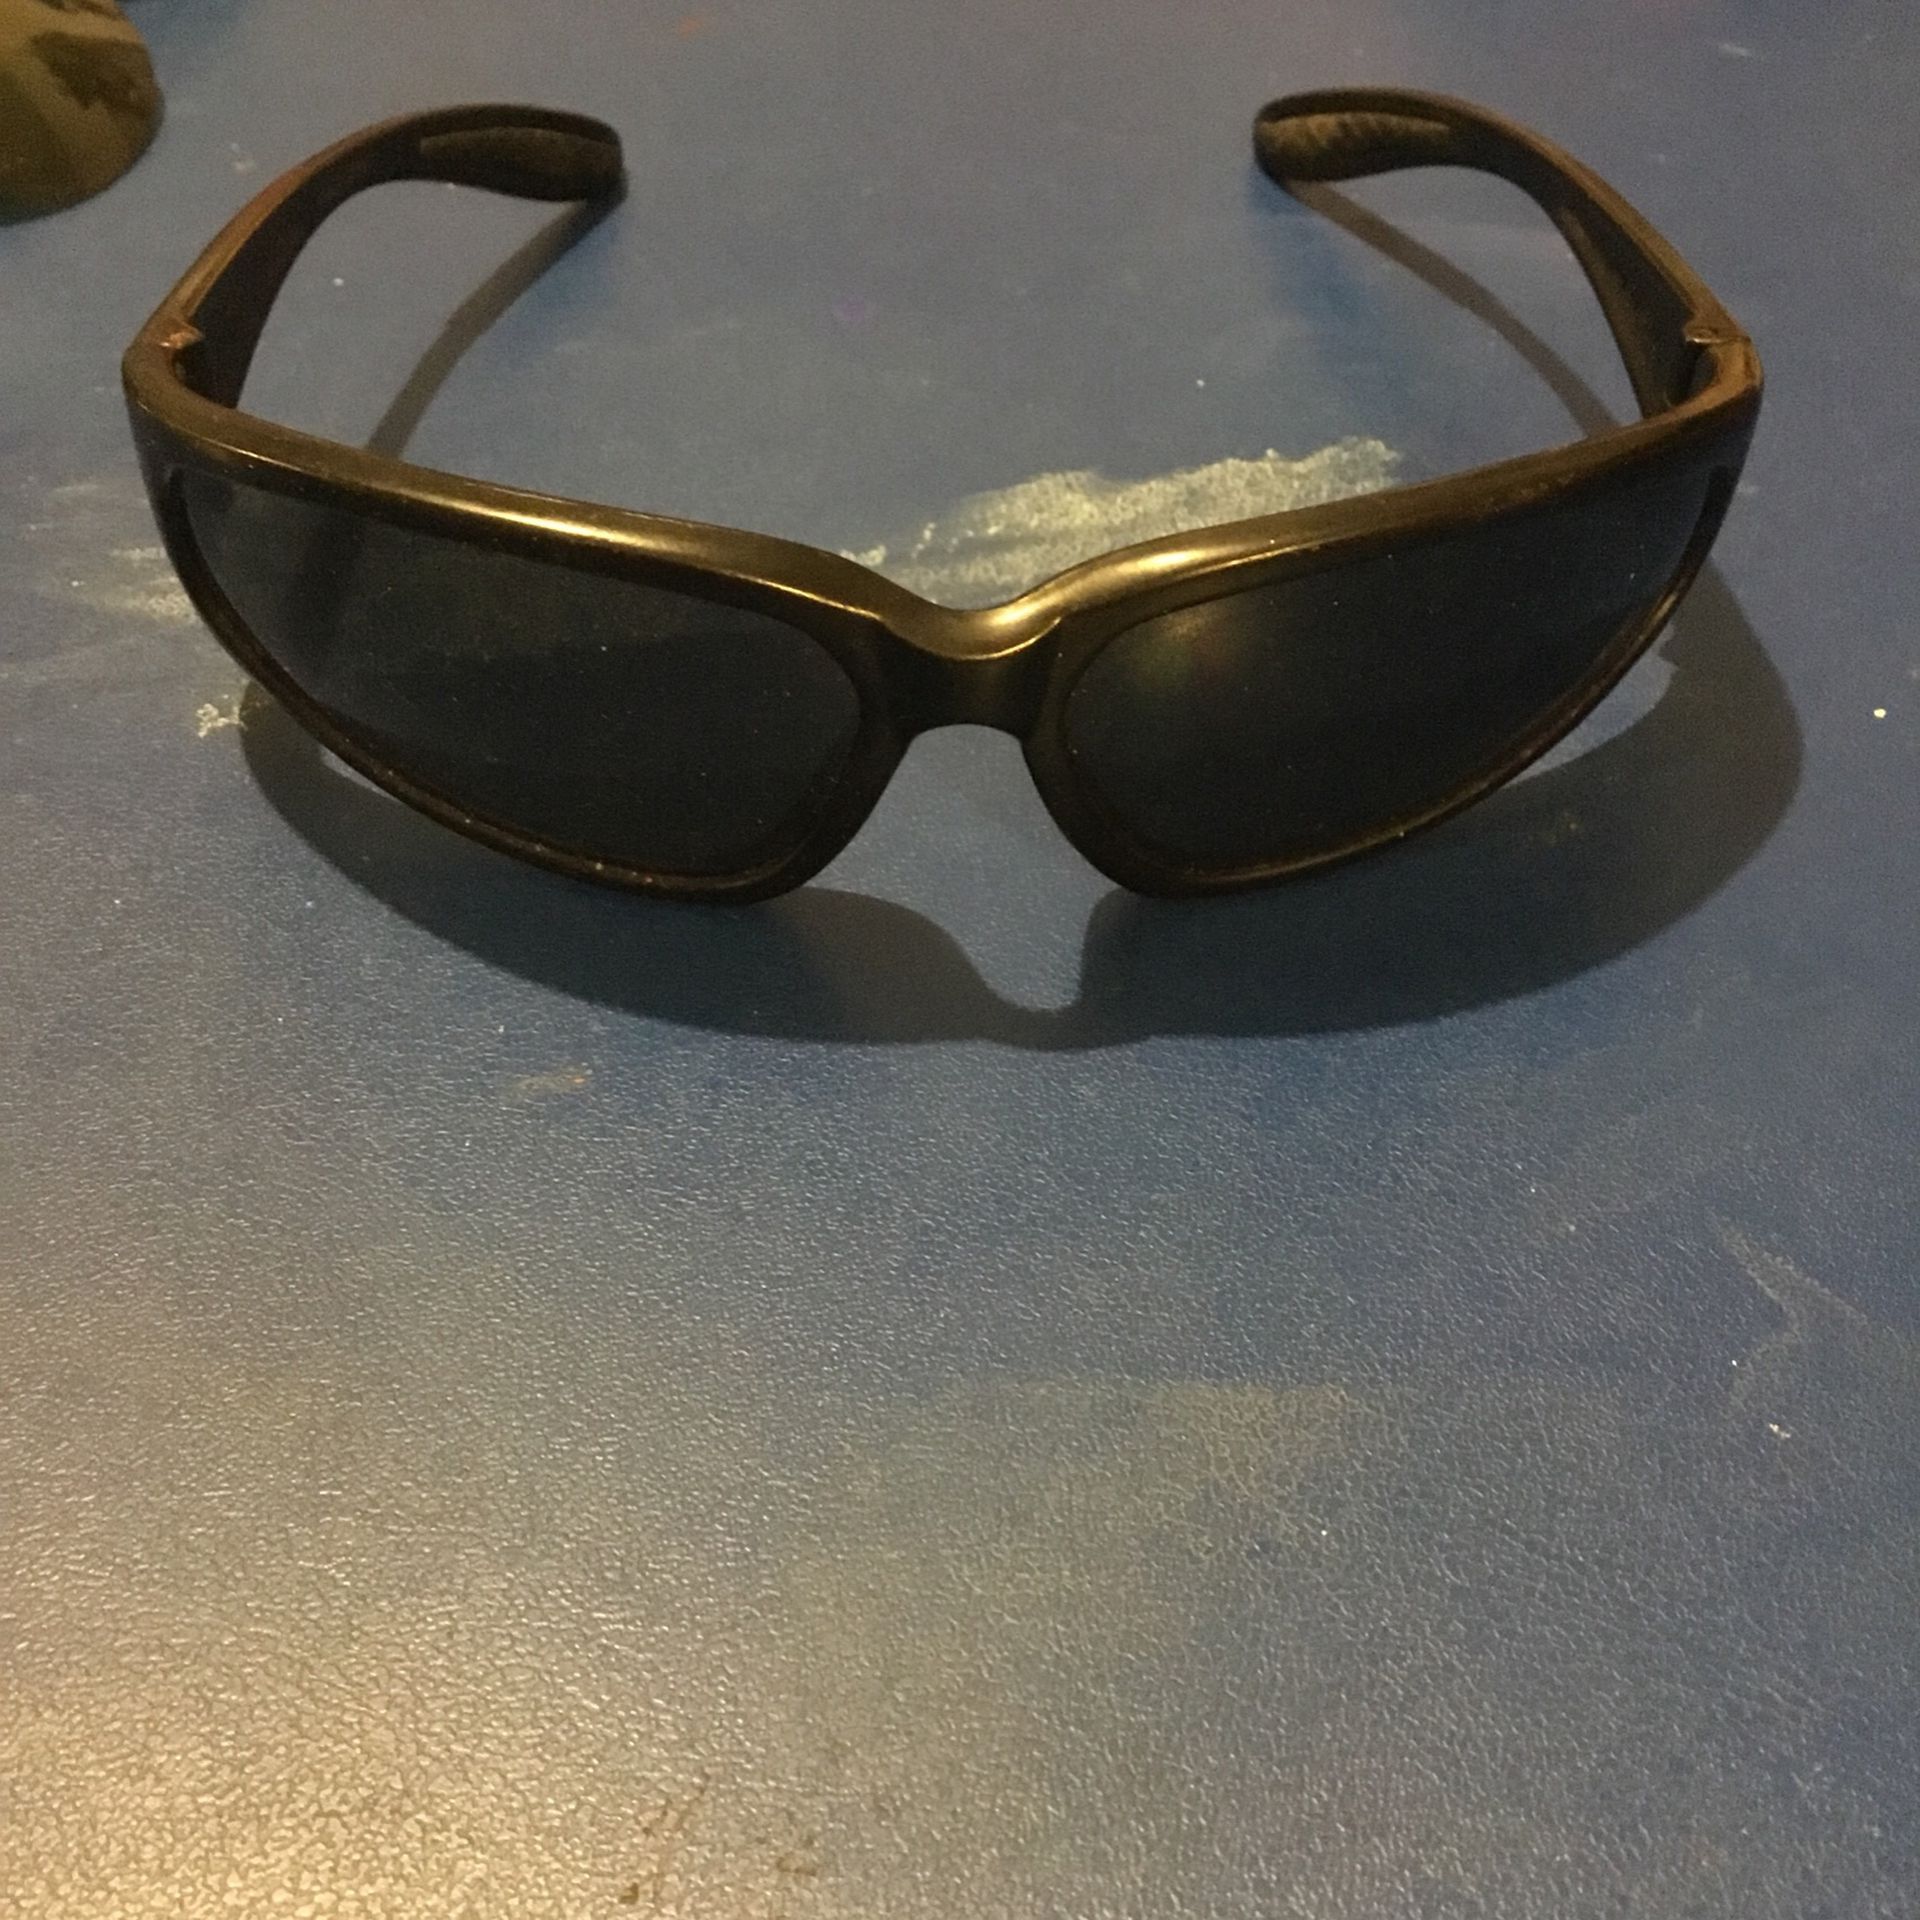 Pair Of Smith & Wesson Sunglasses